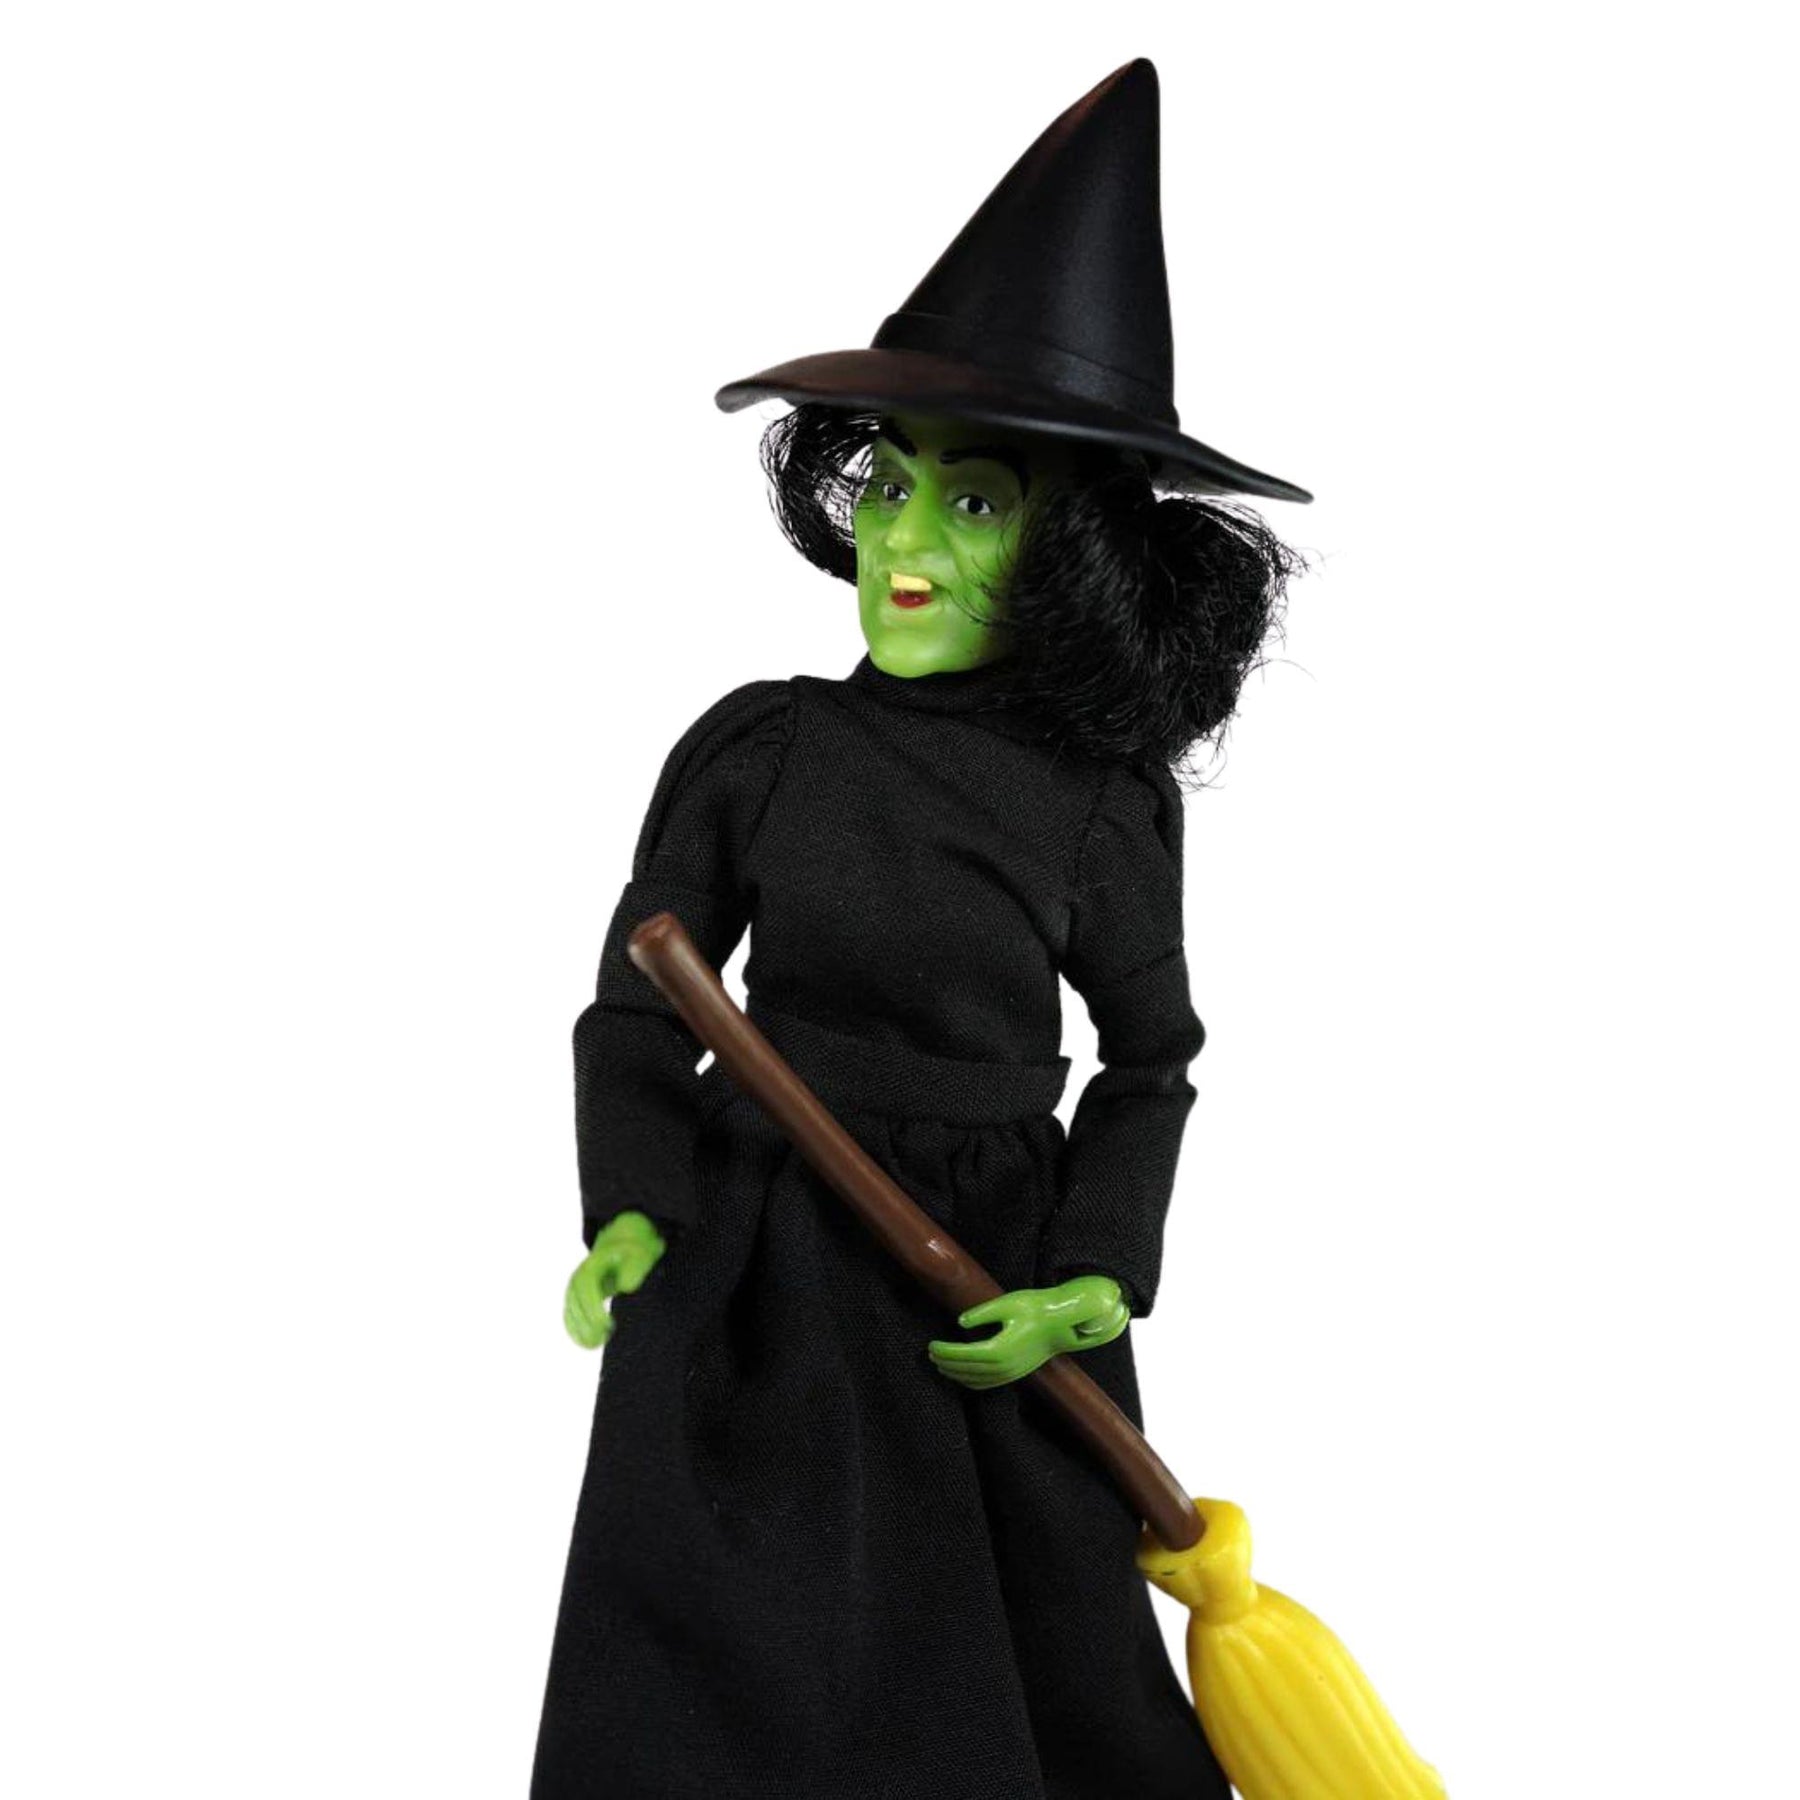 Mego Wizard Of Oz Wicked Witch 8 Inch Action Figure